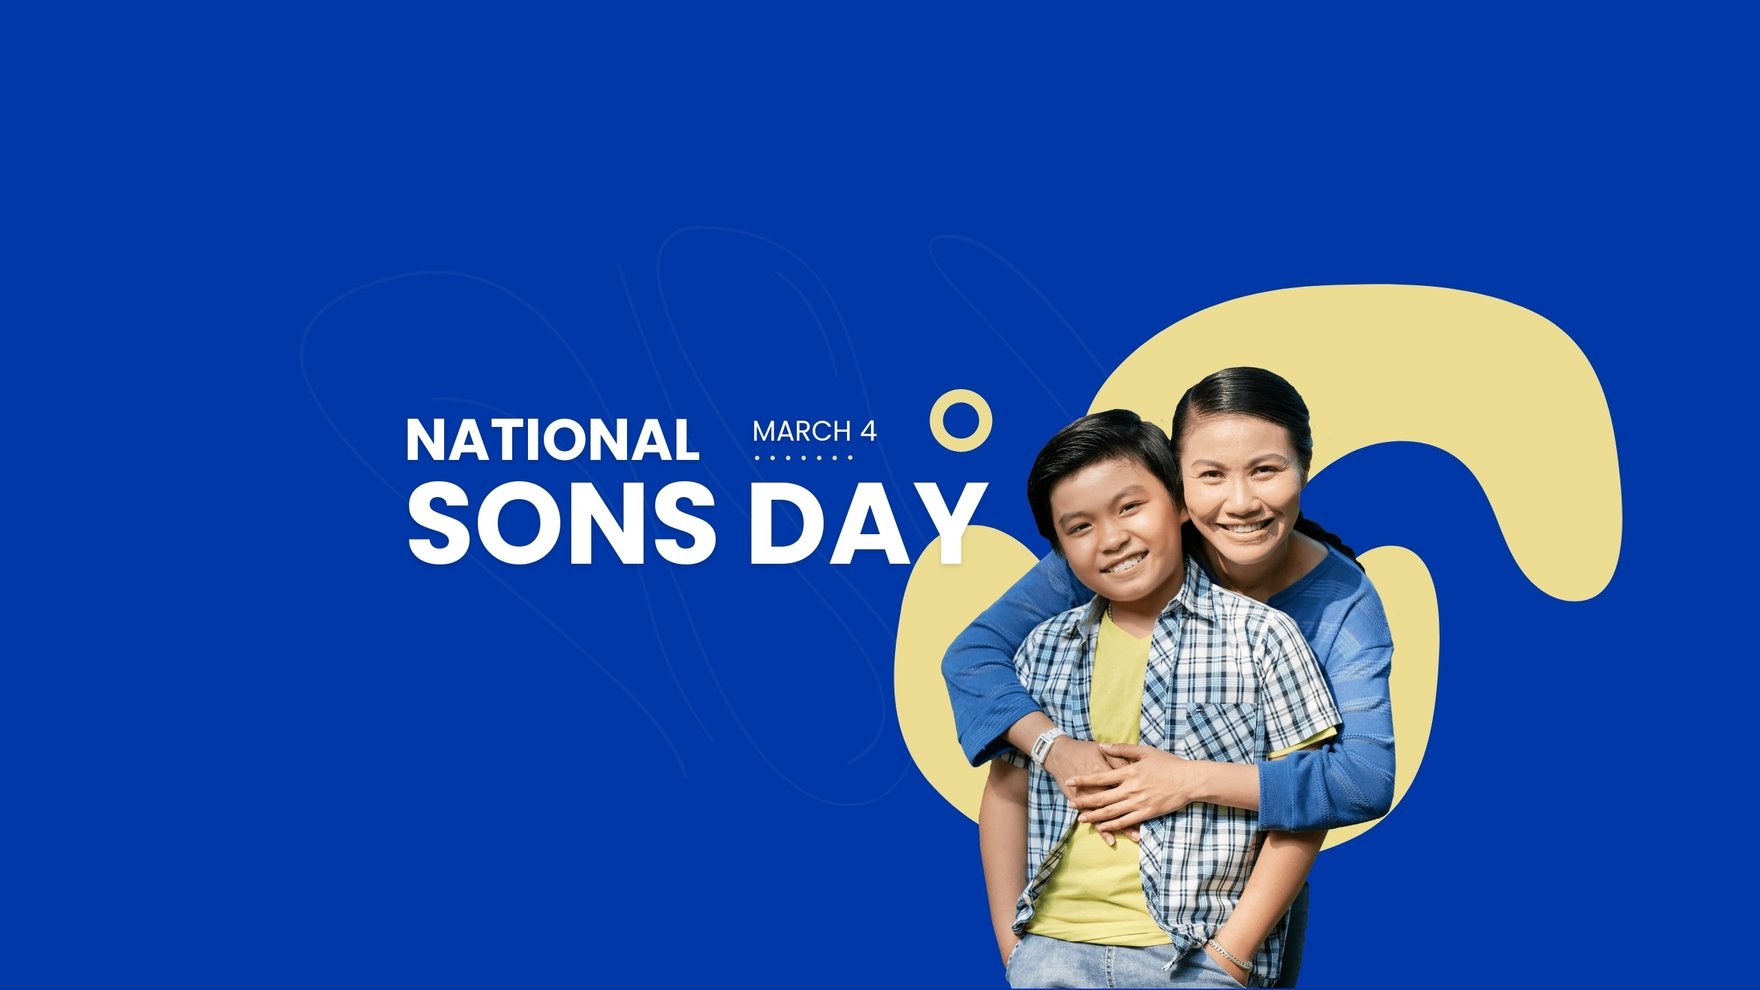 National Sons Day Youtube Banner Template